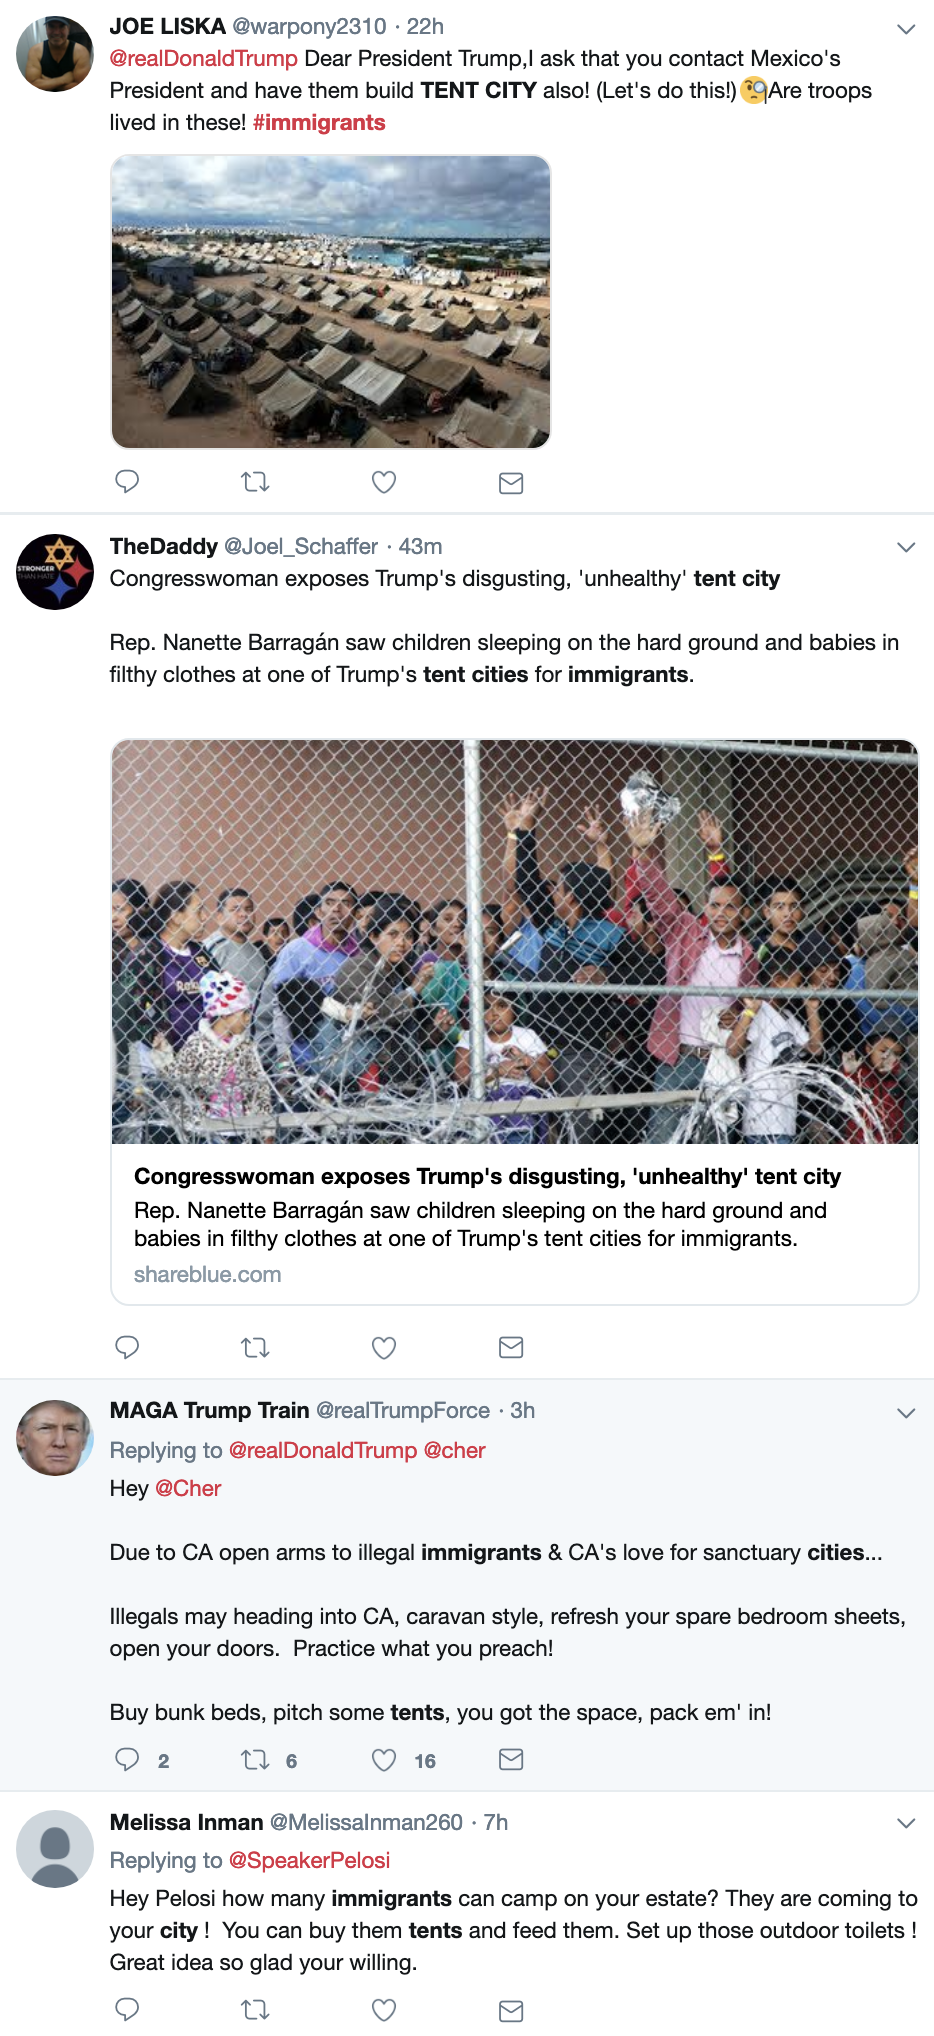 Screen-Shot-2019-04-15-at-2.33.24-PM Daily Beast Investigative Report Uncovers Inhumane Condition At Refugee Camps Corruption Crime Donald Trump Immigration Politics Racism Refugees Top Stories 